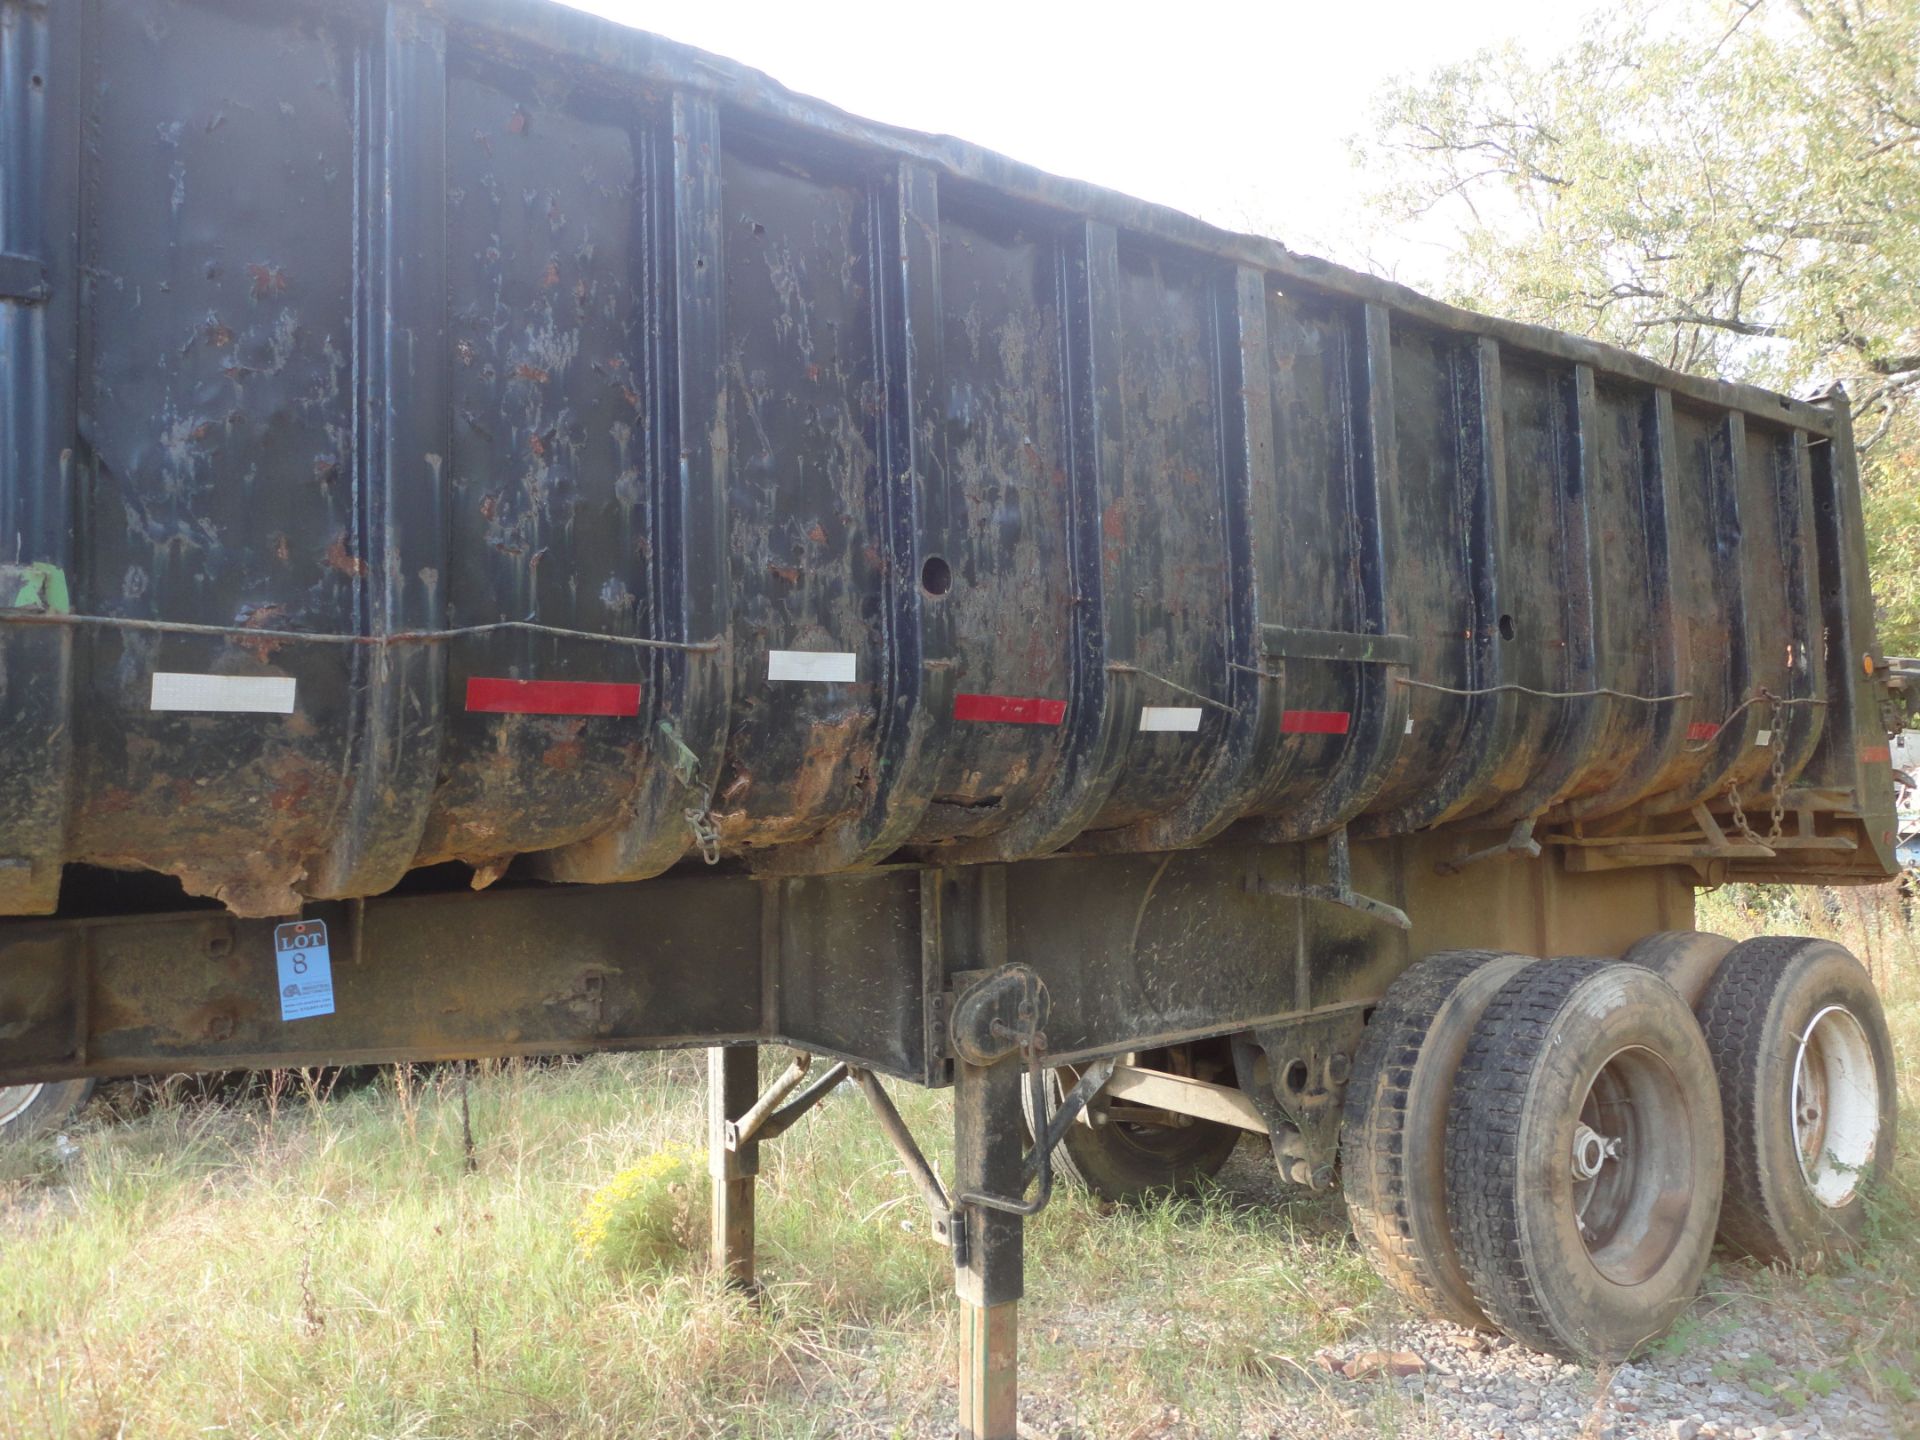 21' LONG X 5" SIDES APPROX. MFG. UNKNOWN HYDRAULIC TANDEM AXLE U-SHAPED STEEL BED DUMP TRAILER; - Image 6 of 6